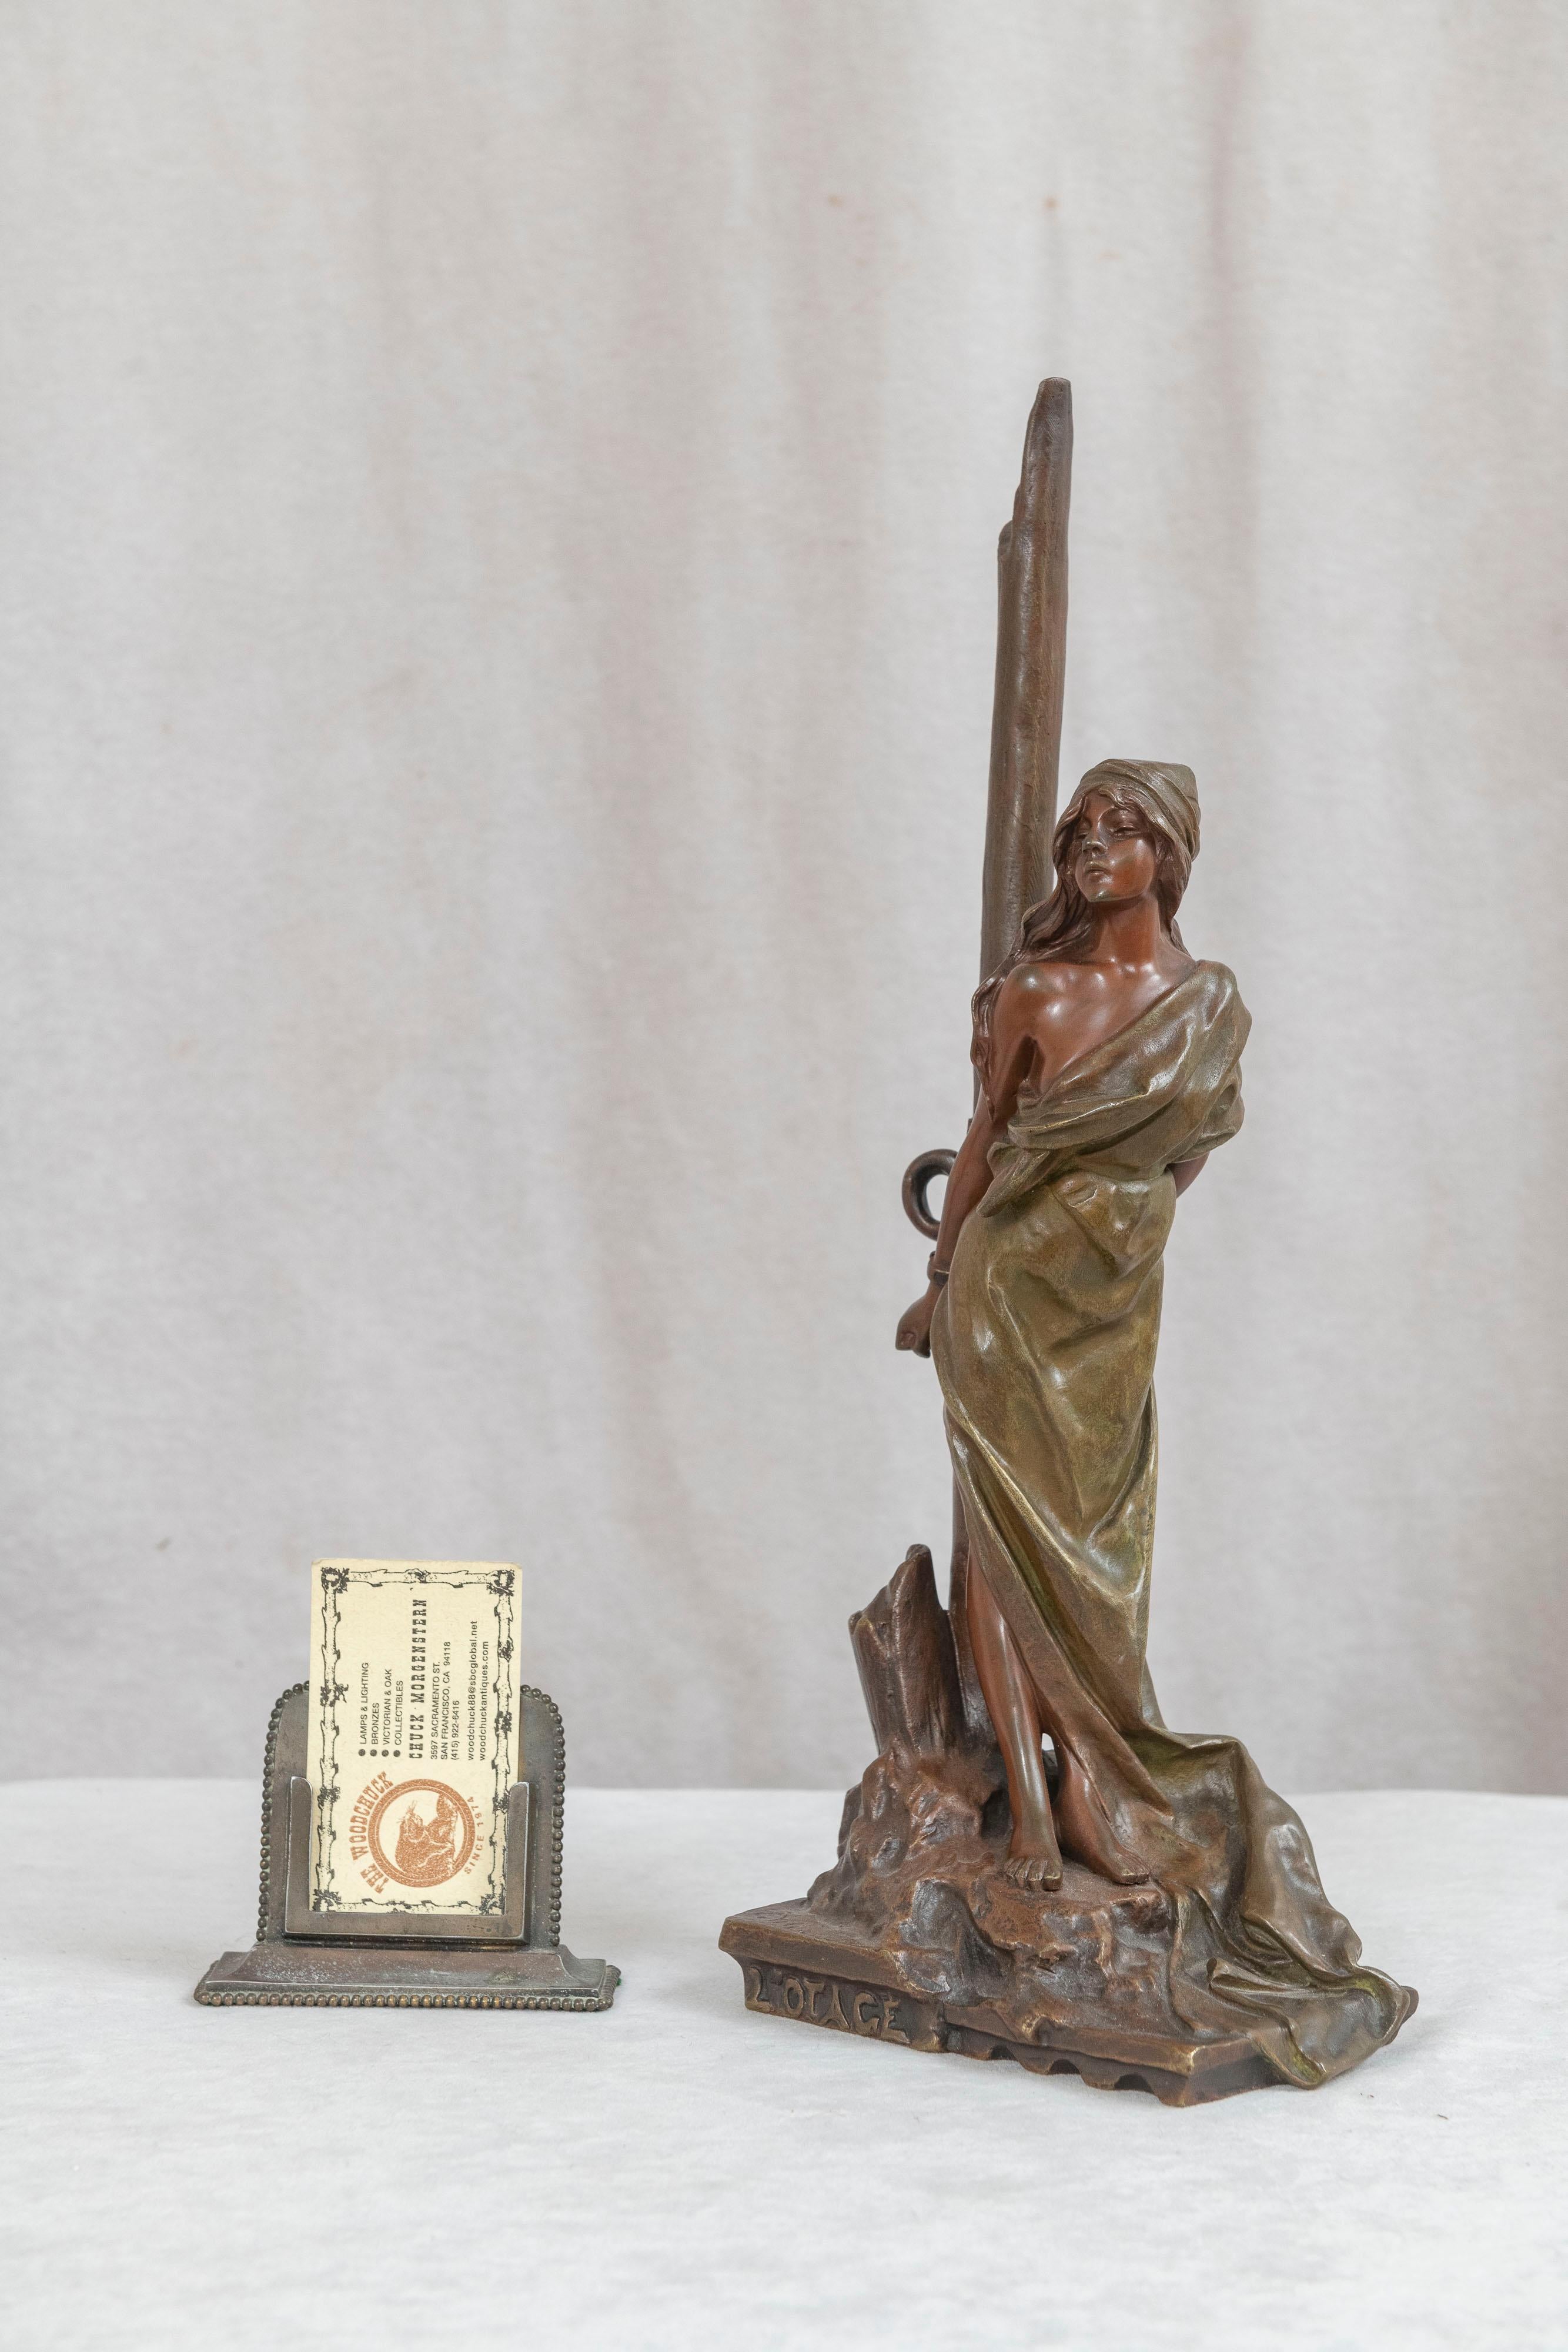 This beautiful Art Nouveau bronze displays the maiden chained to a tree, and titled L'Otage (The Hostage). She is beautifully patinated in brown and green, a greater way of expressing the subject. Emmanuel Villanis (1858-1914) was one of the more